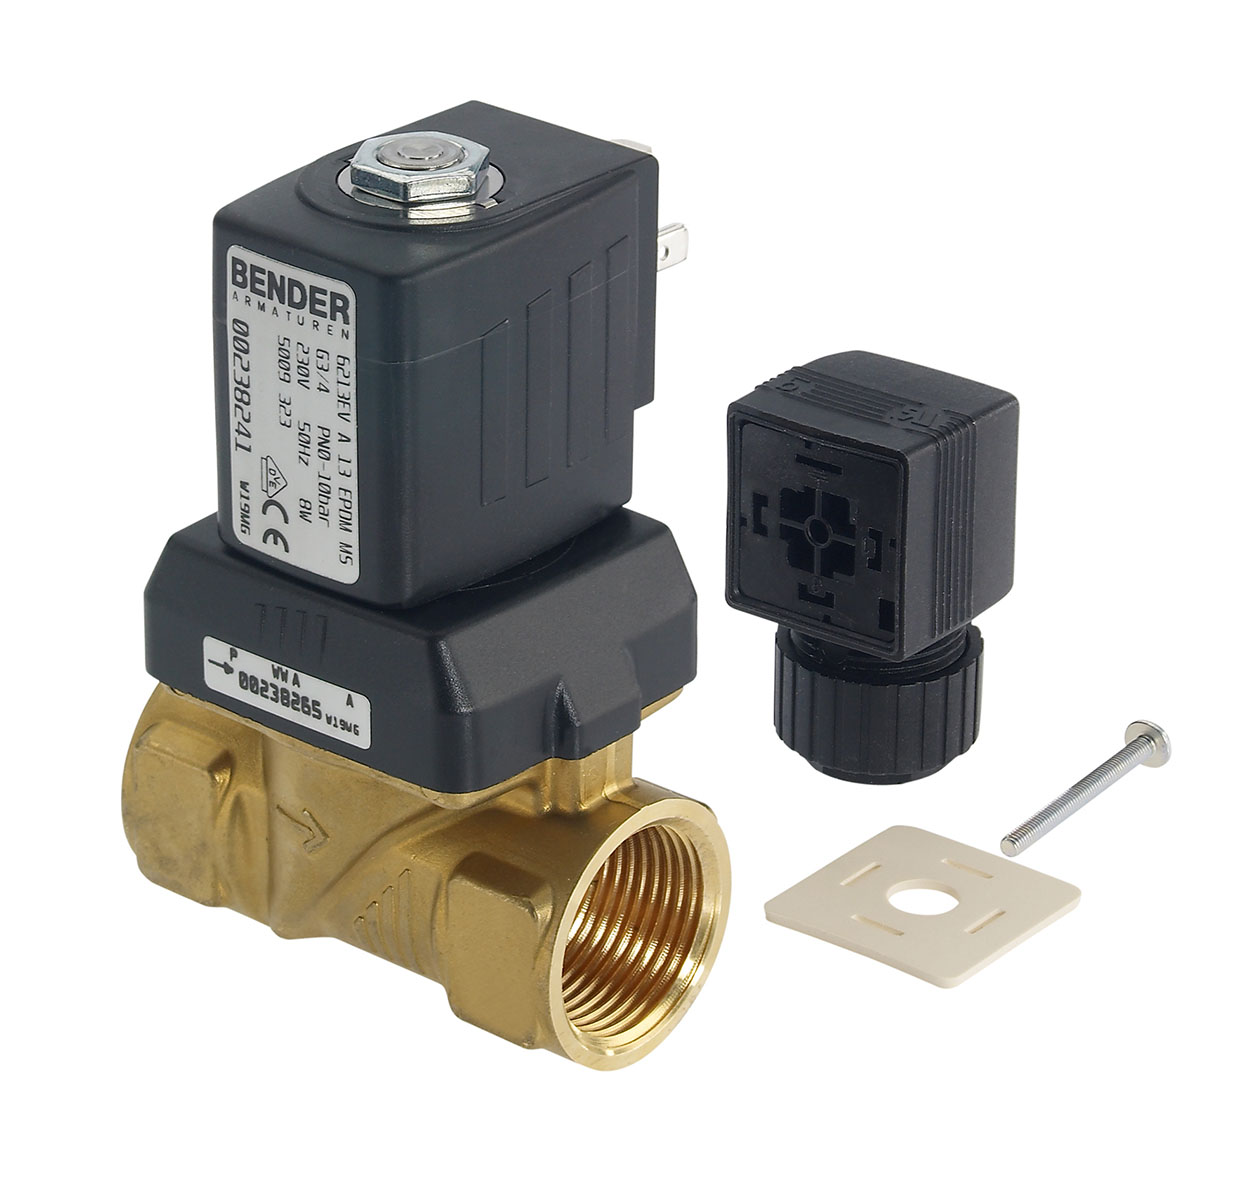 5009301 - 2/2 way solenoidvalve normally closed for fluids Type 1; female thread